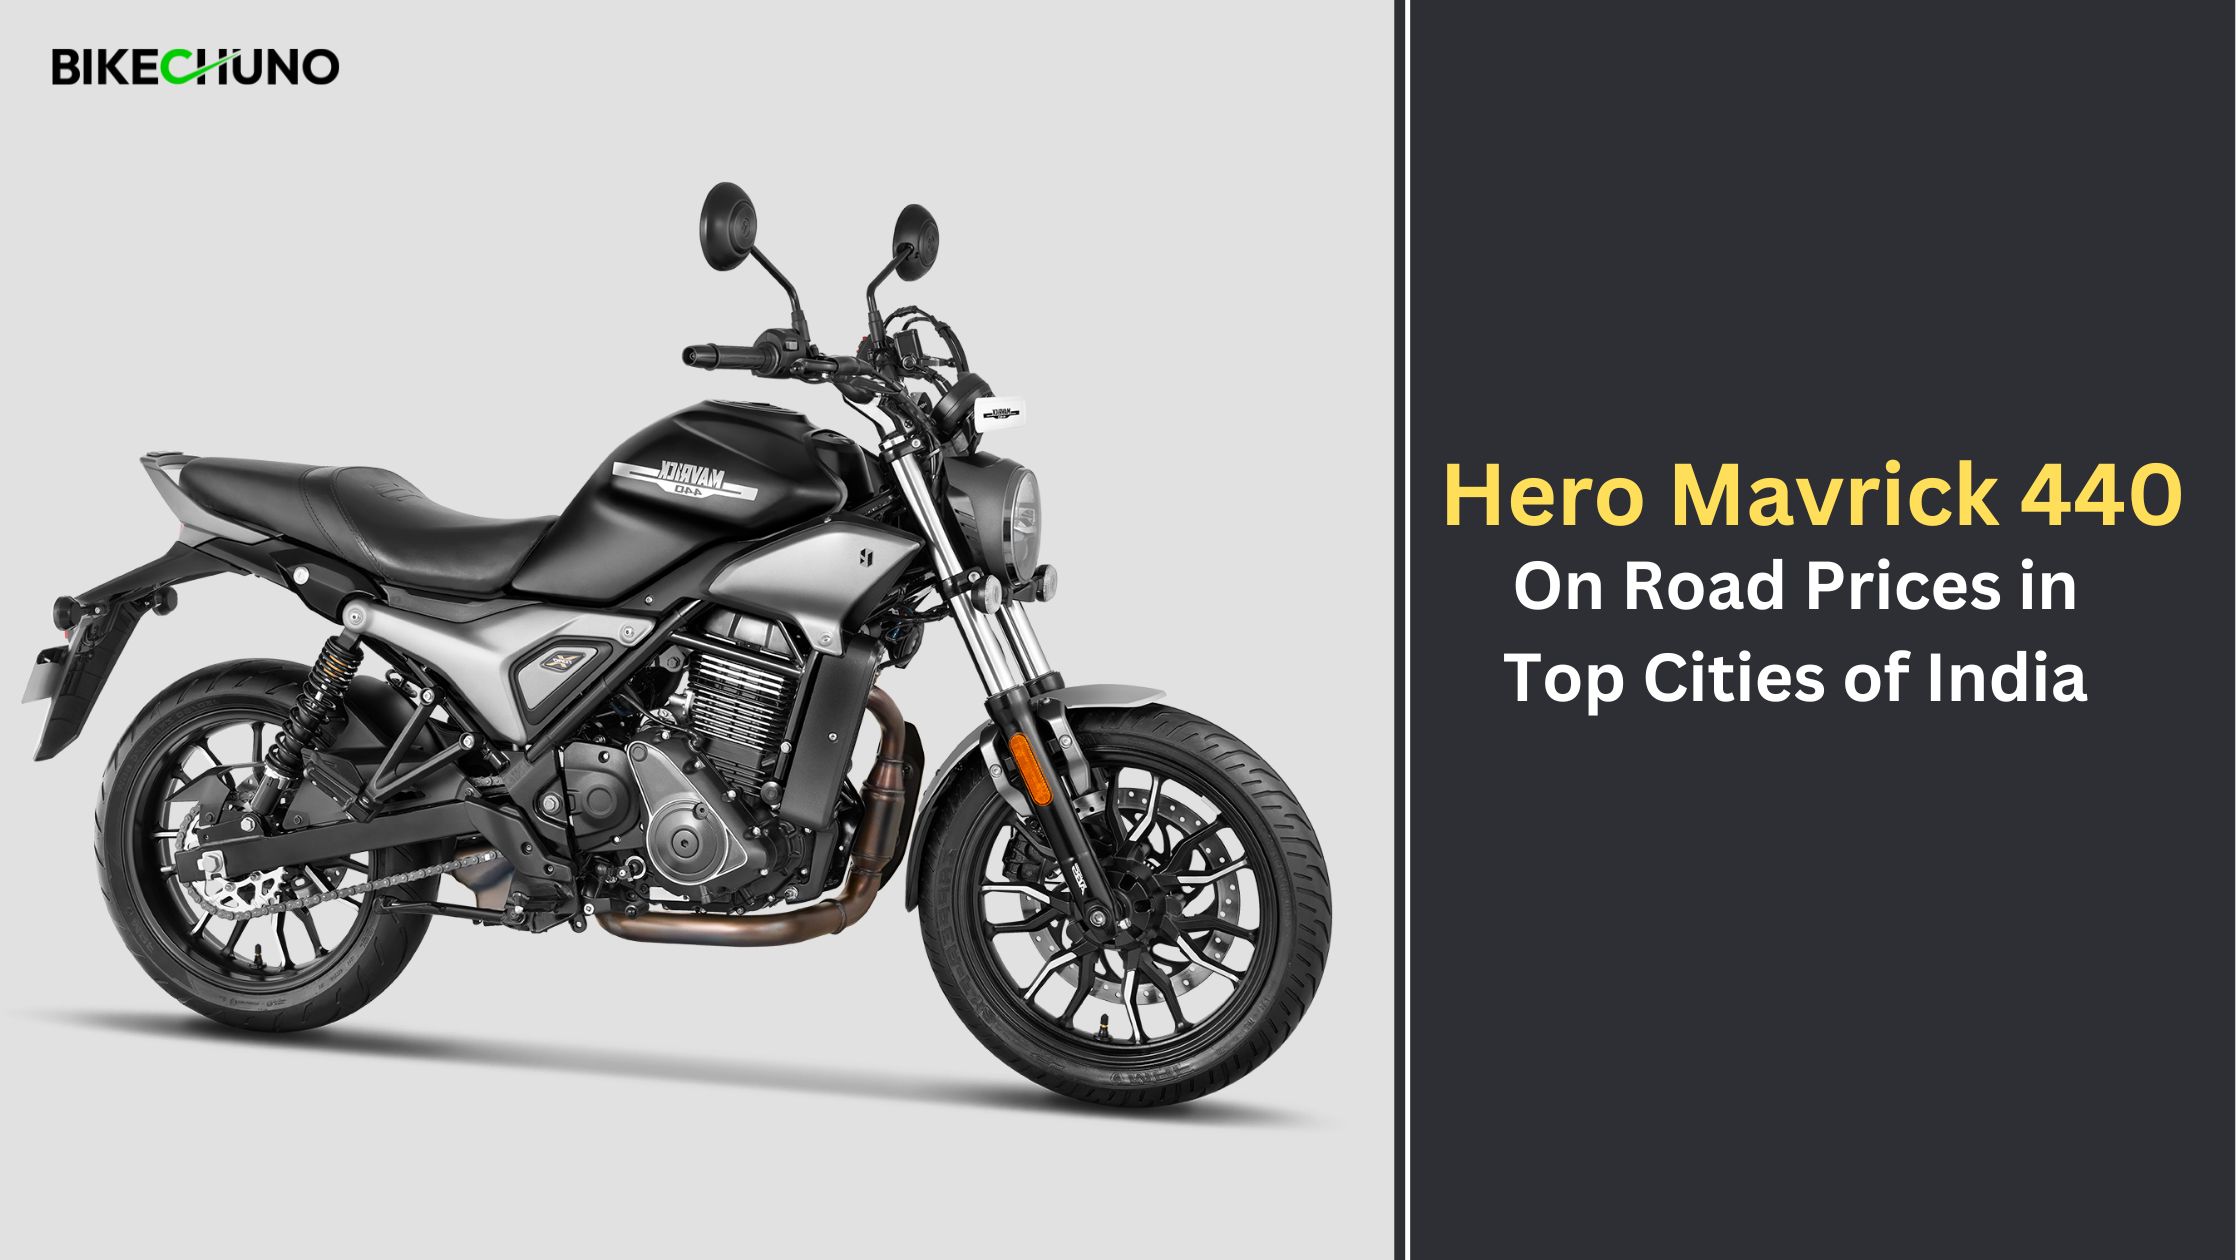 Hero Mavrick 440 on Road Prices in Top Cities of India